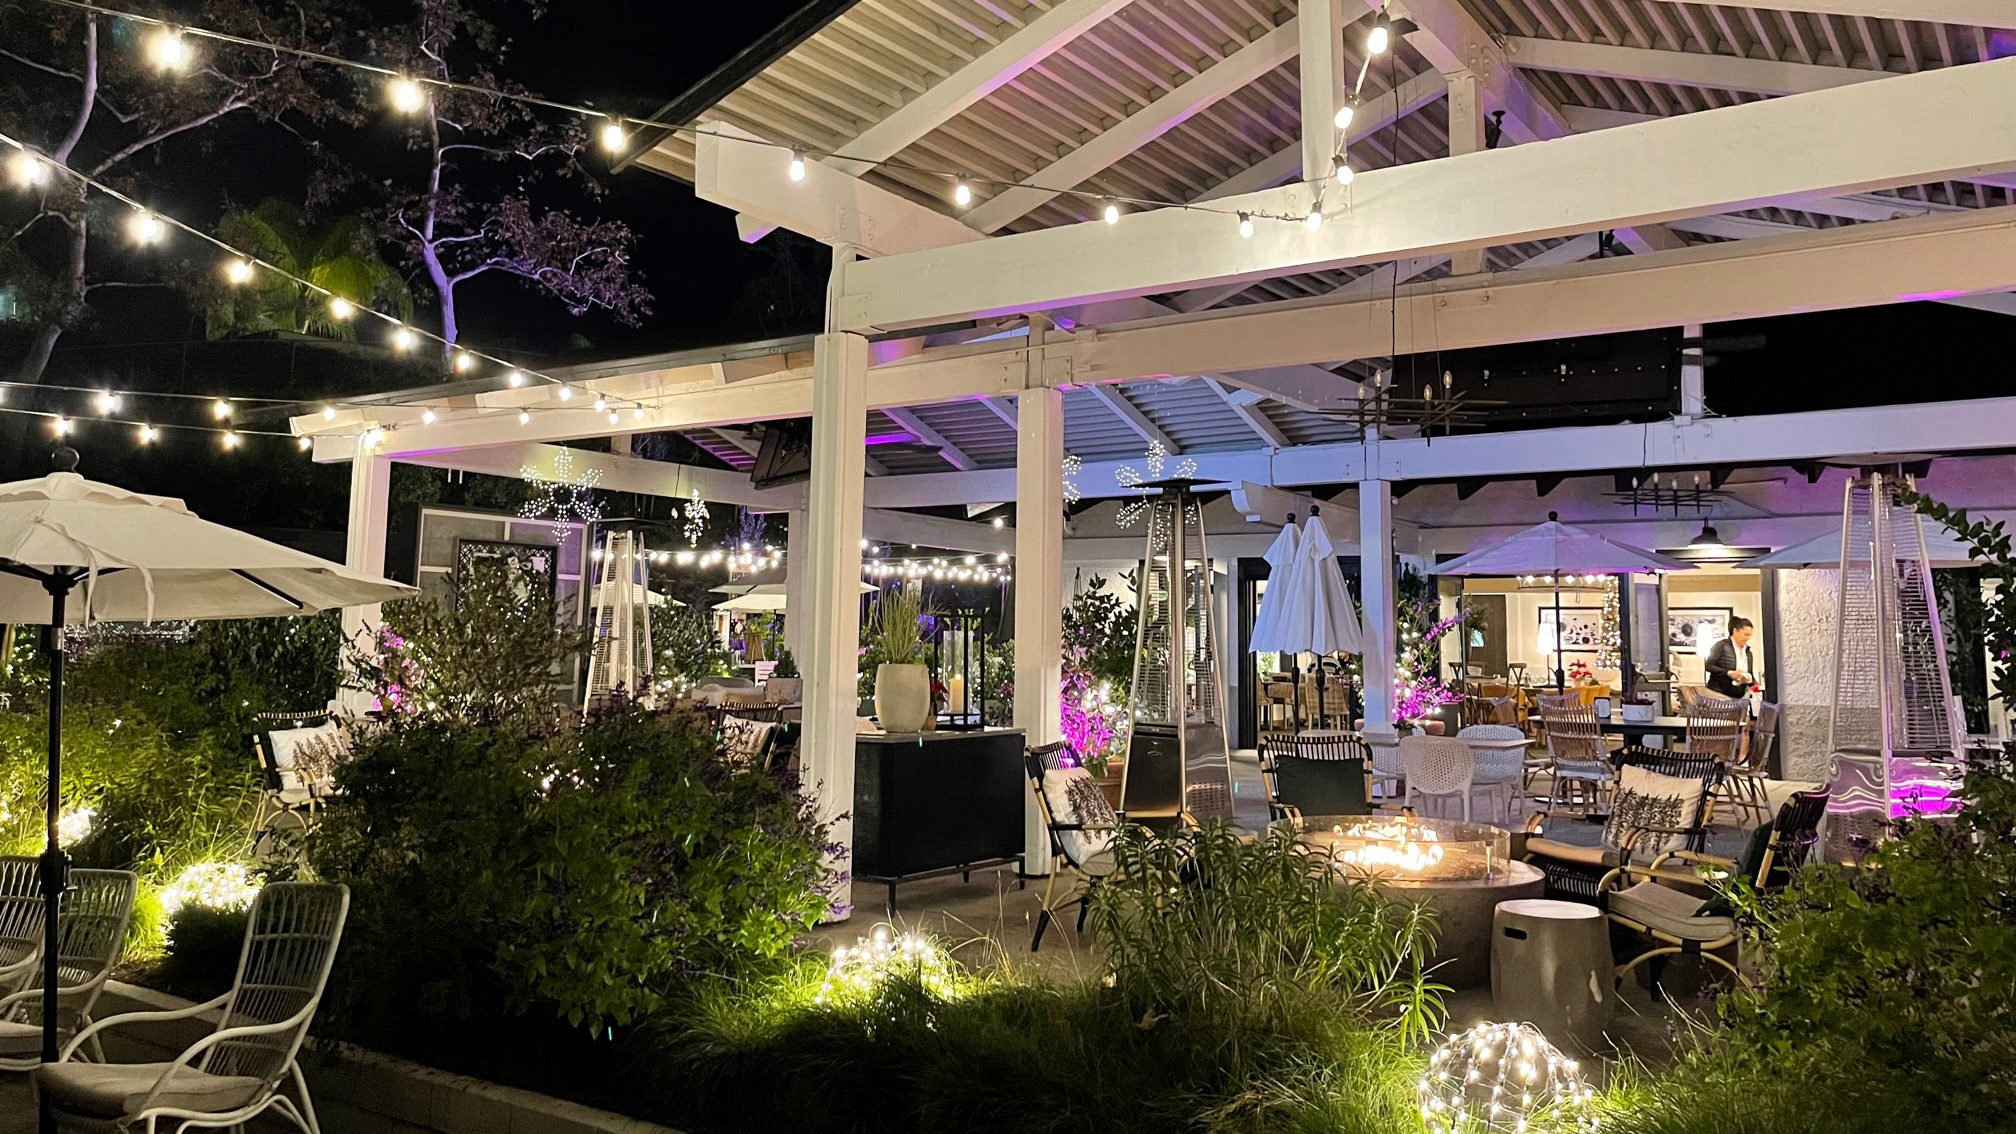 Terrace on the Green restaurant patio at night